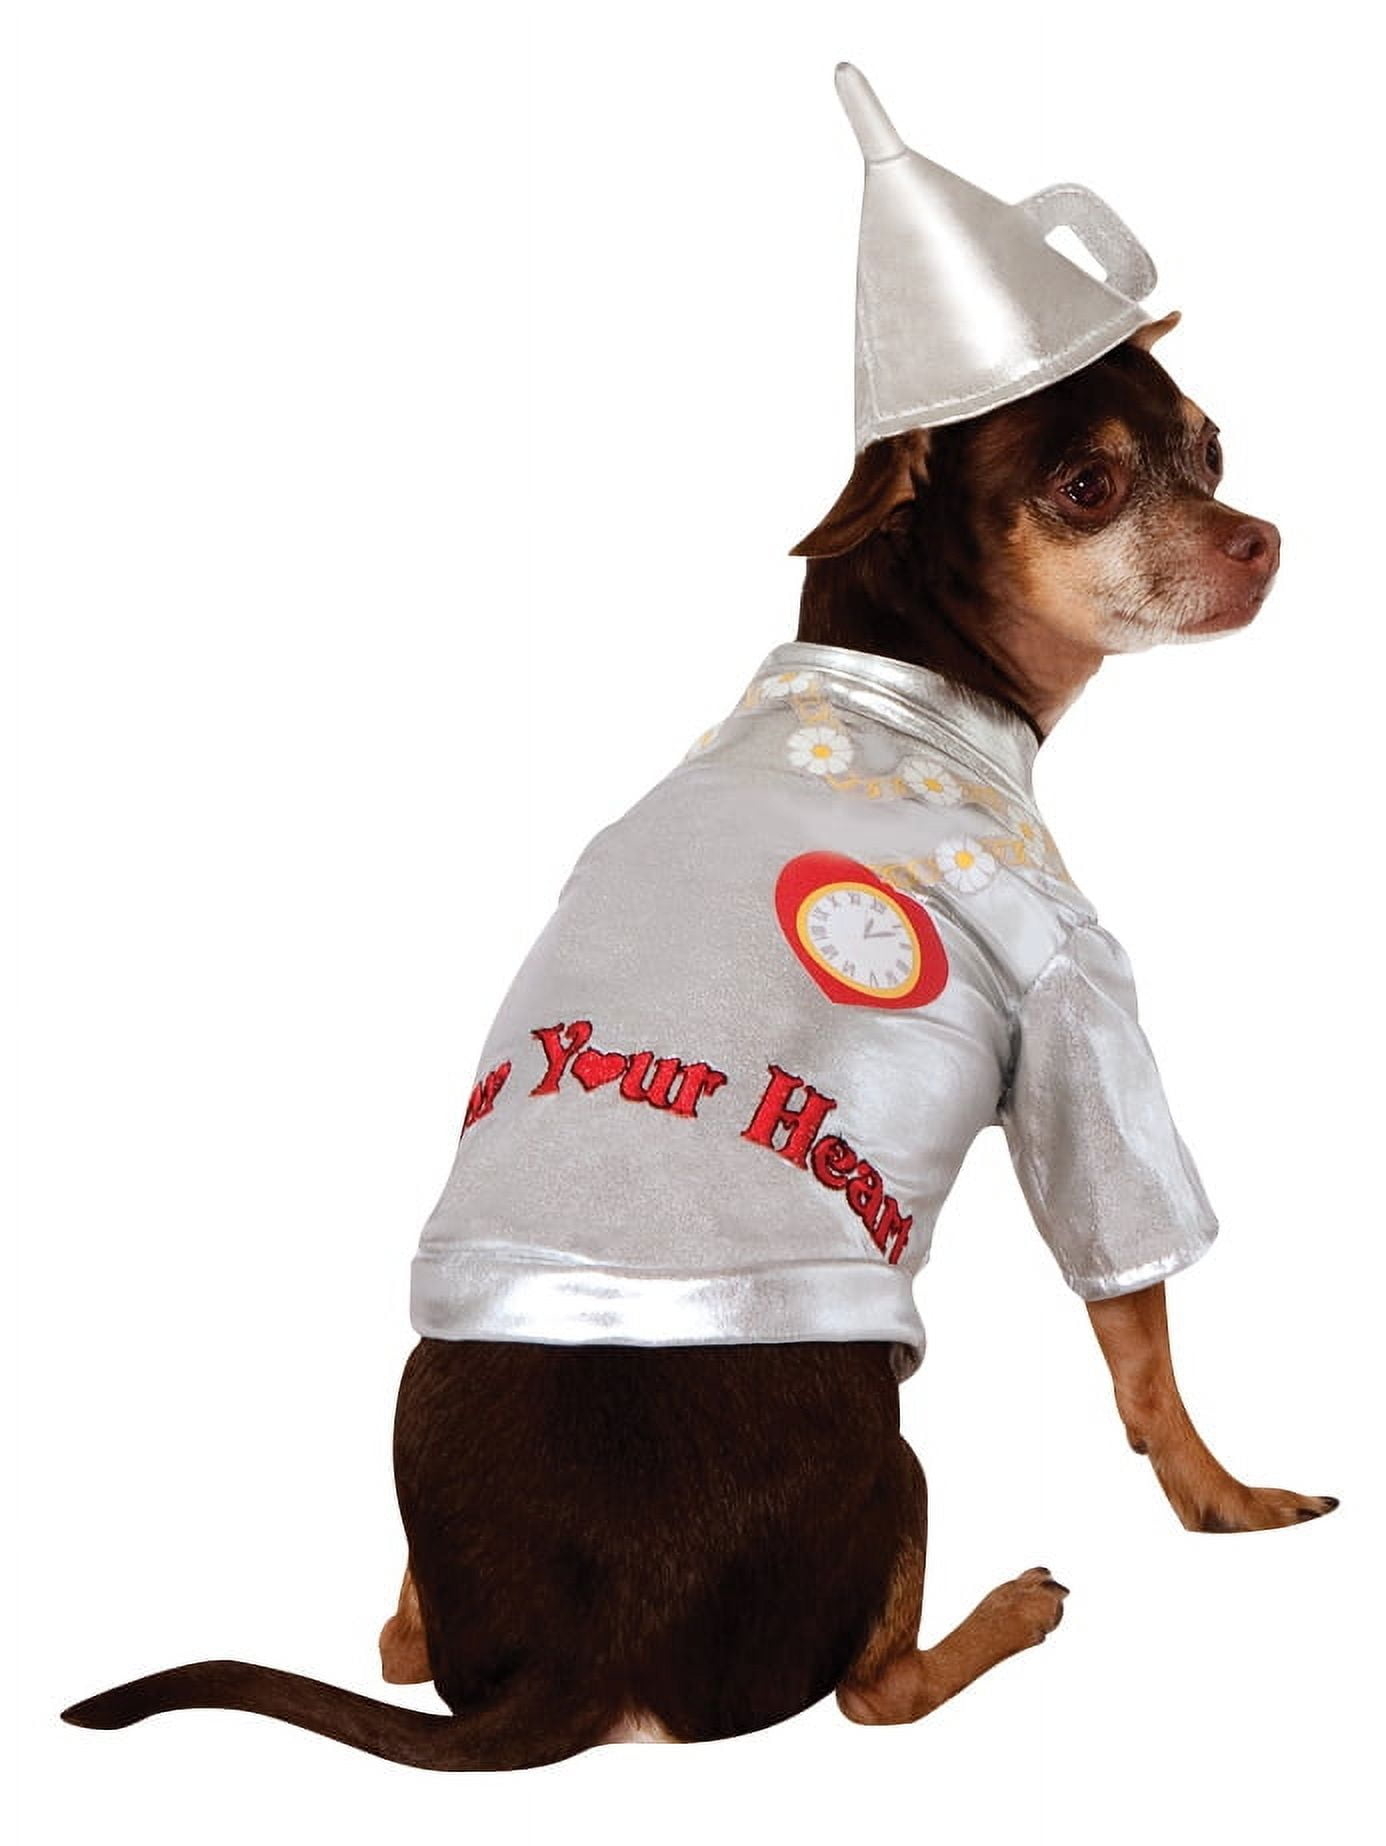 the dog dressed as the tin man